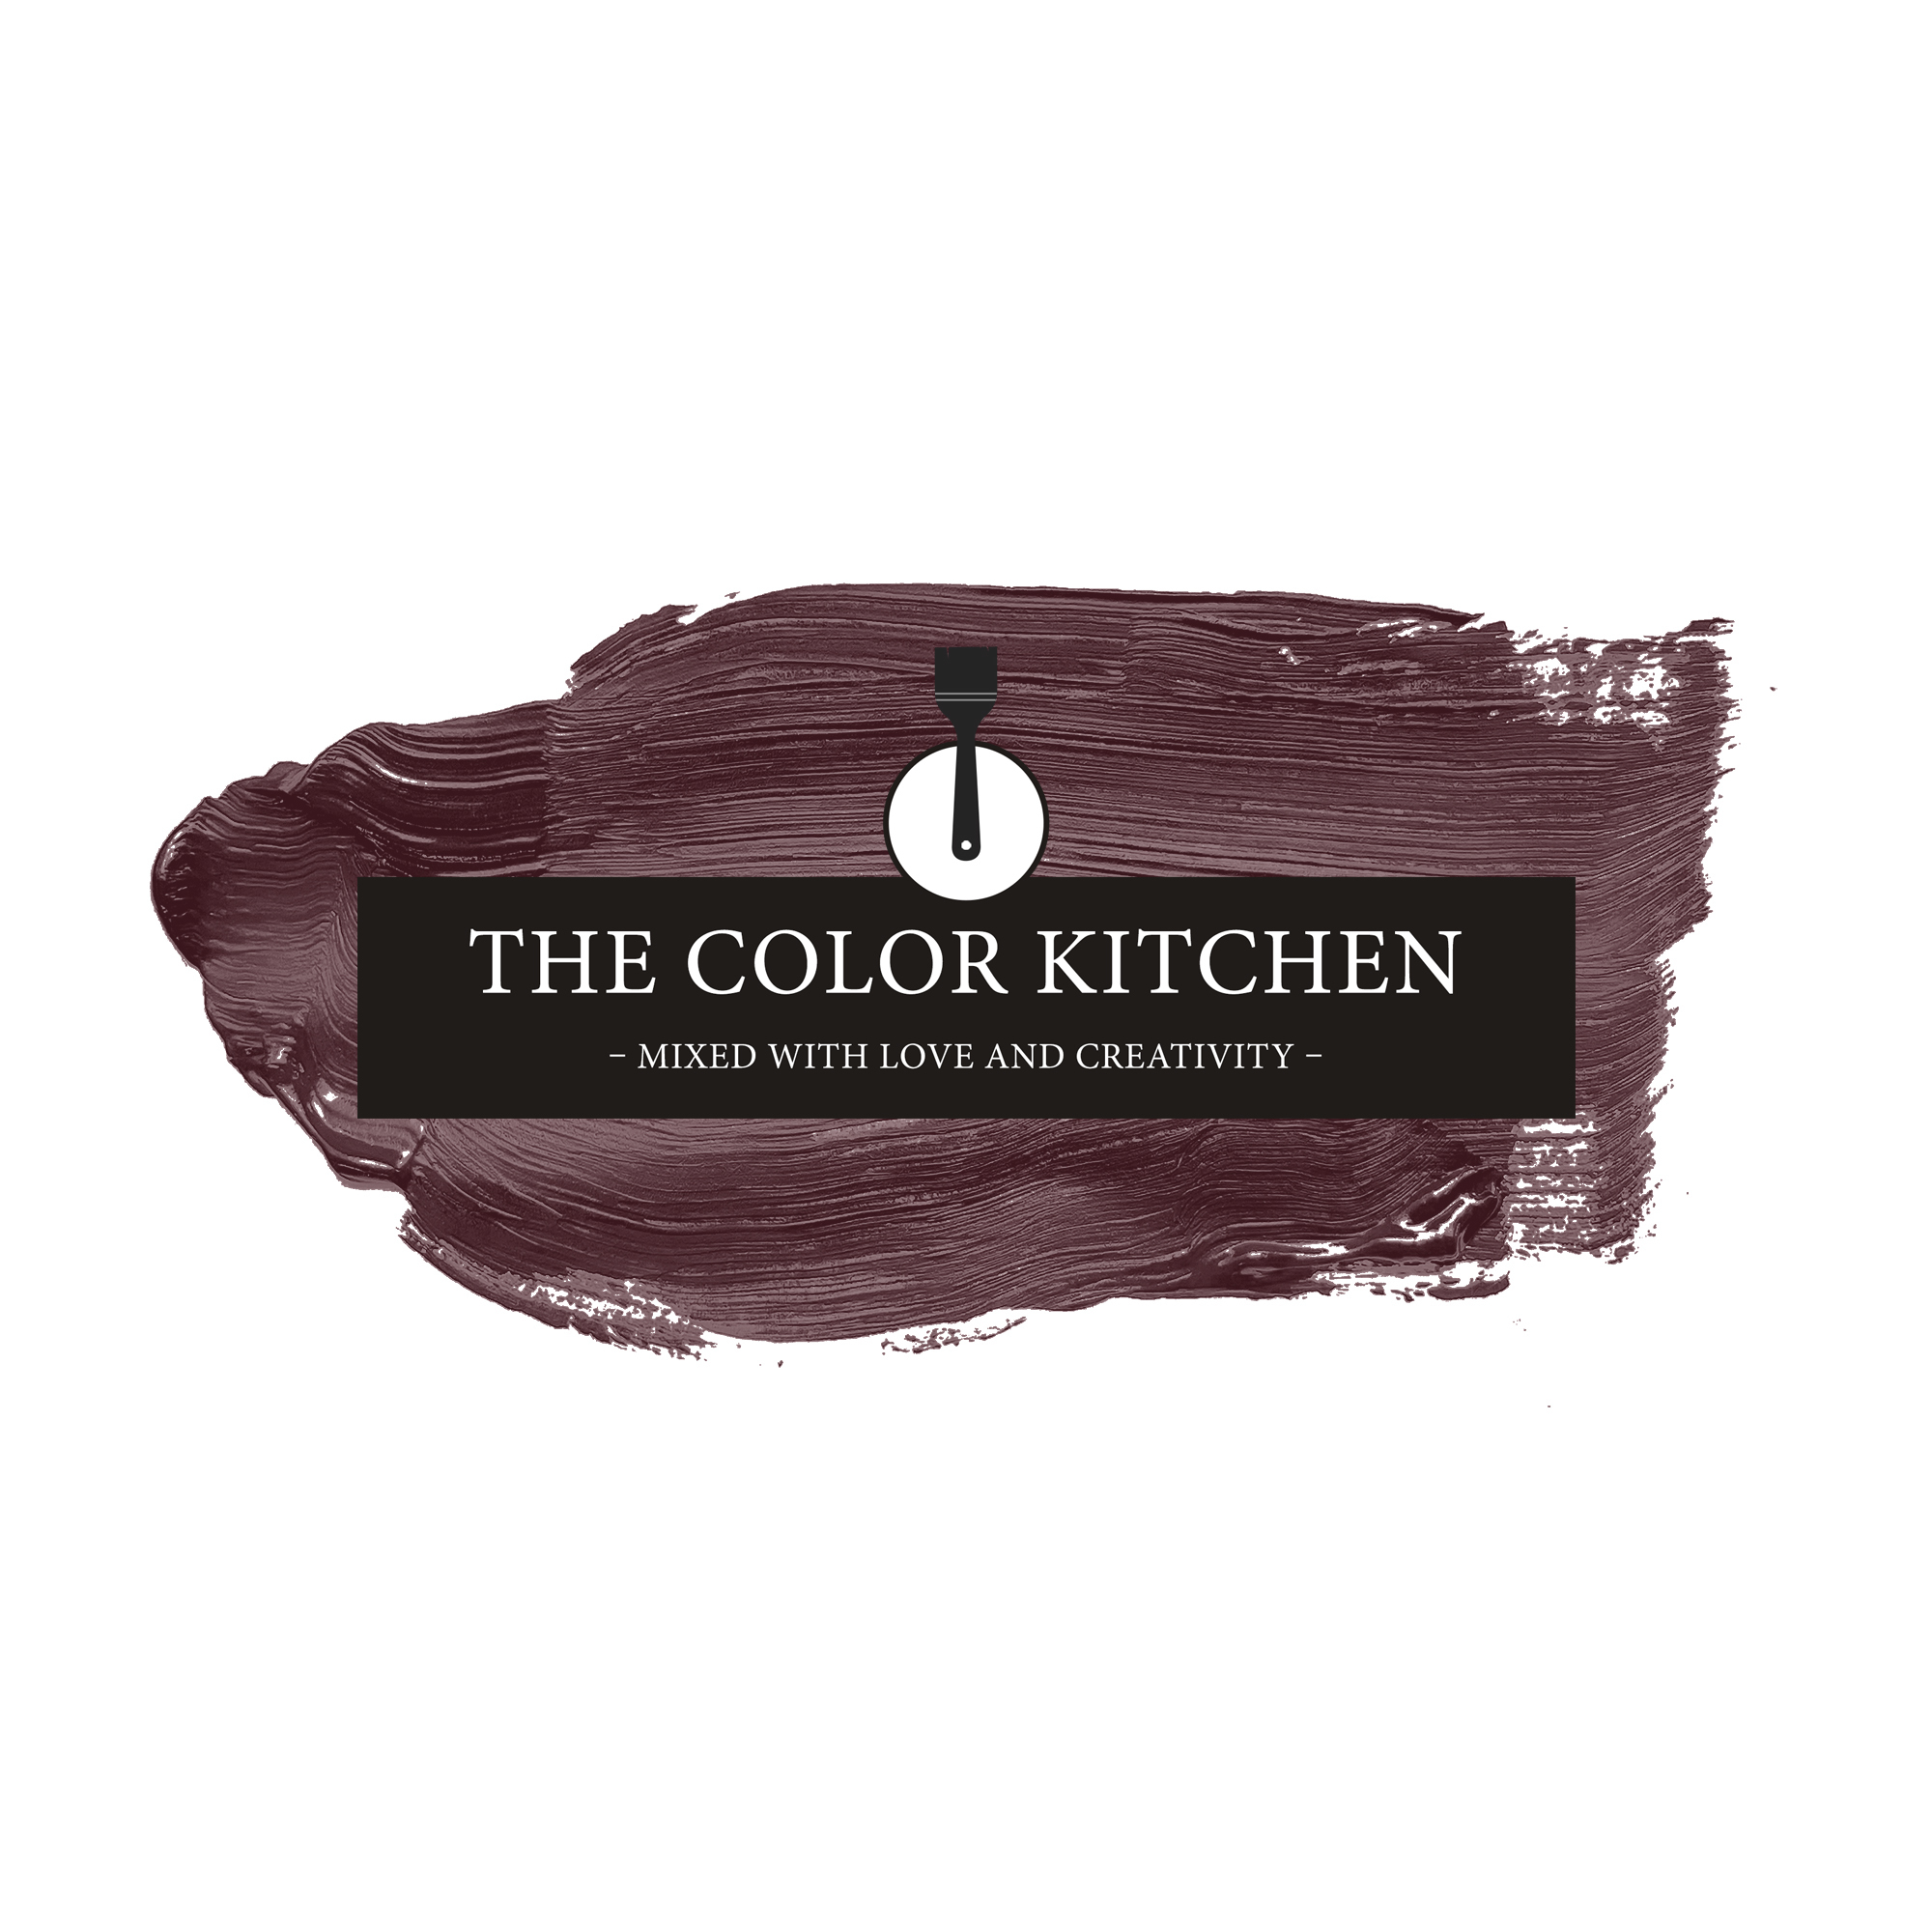 The Color Kitchen Red Wine 5 l